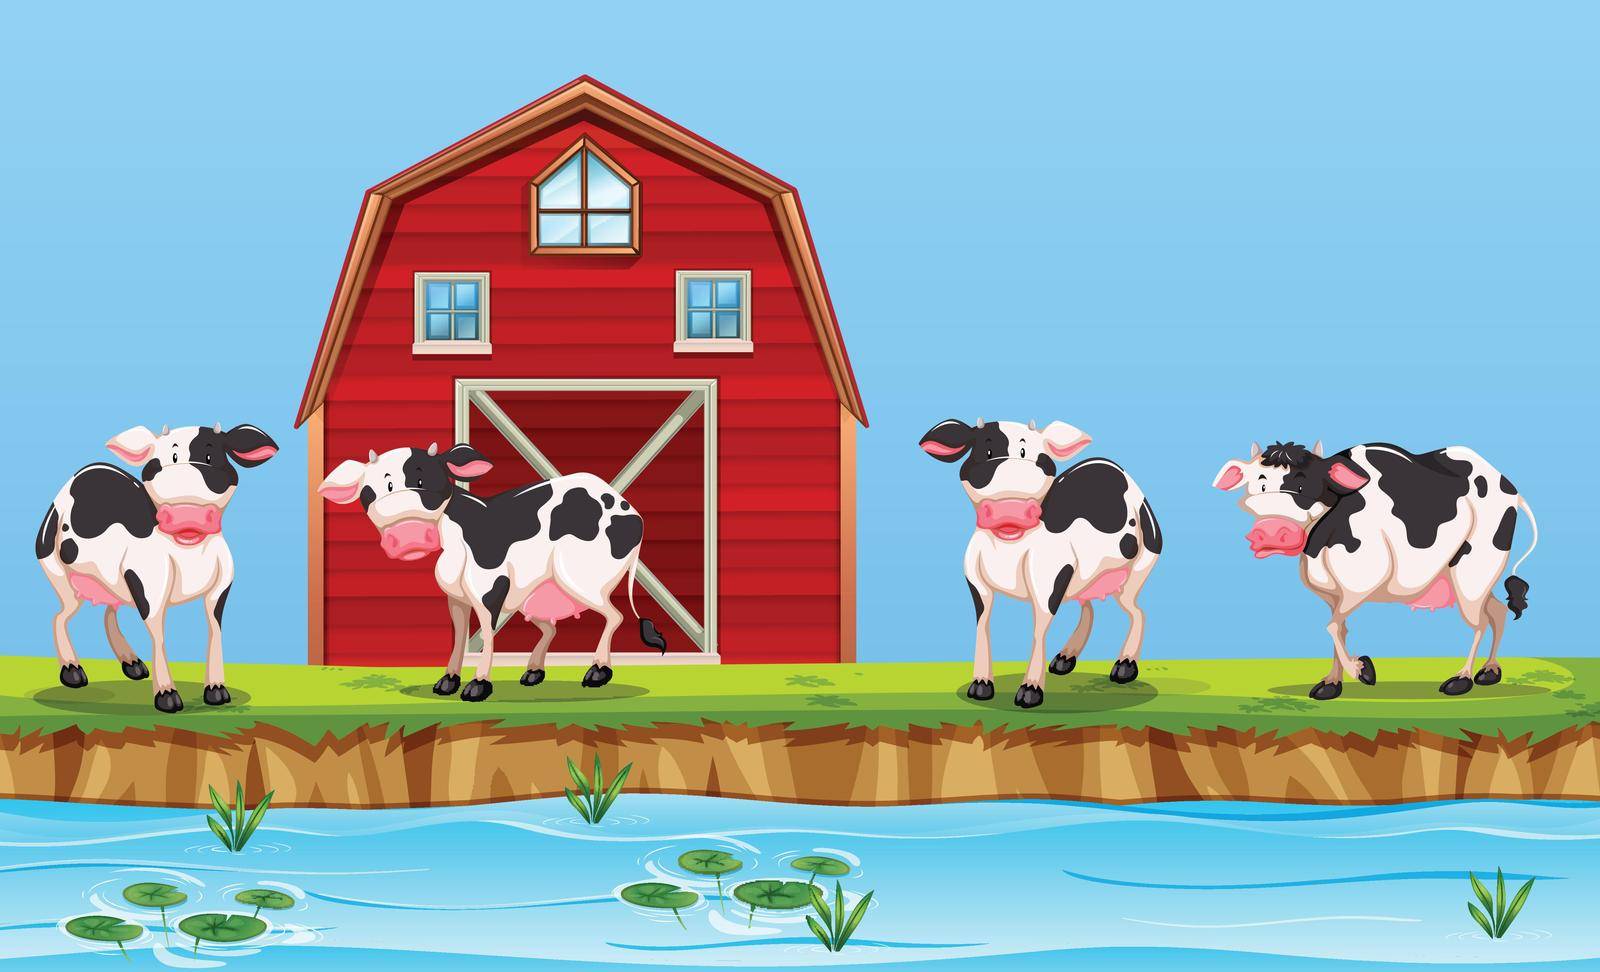 Cow at the rural farm illustration